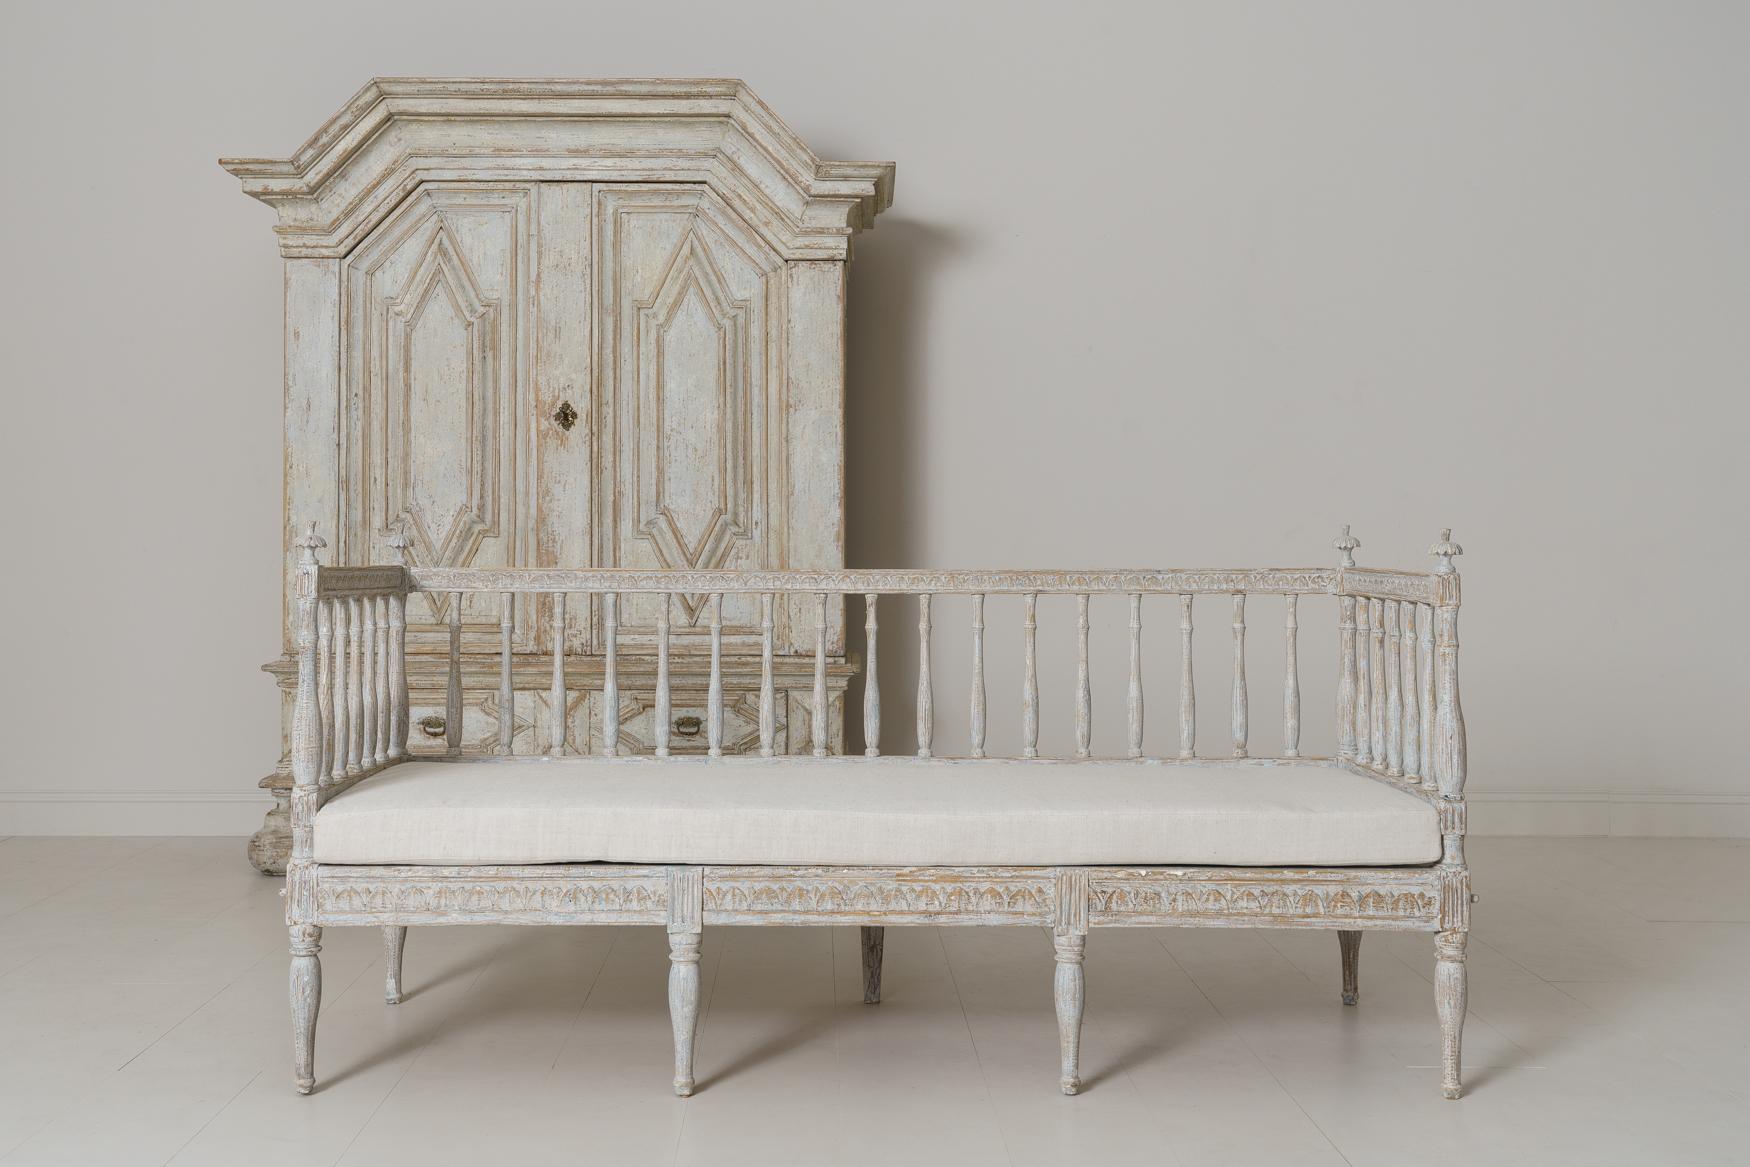 A Swedish Gustavian period sofa bench from the 19th century with a soft blue and aged white painted patina, newly upholstered in linen, circa 1800. Baluster back and sides with turned finials. The seat and back feature carved egg and dart detail.